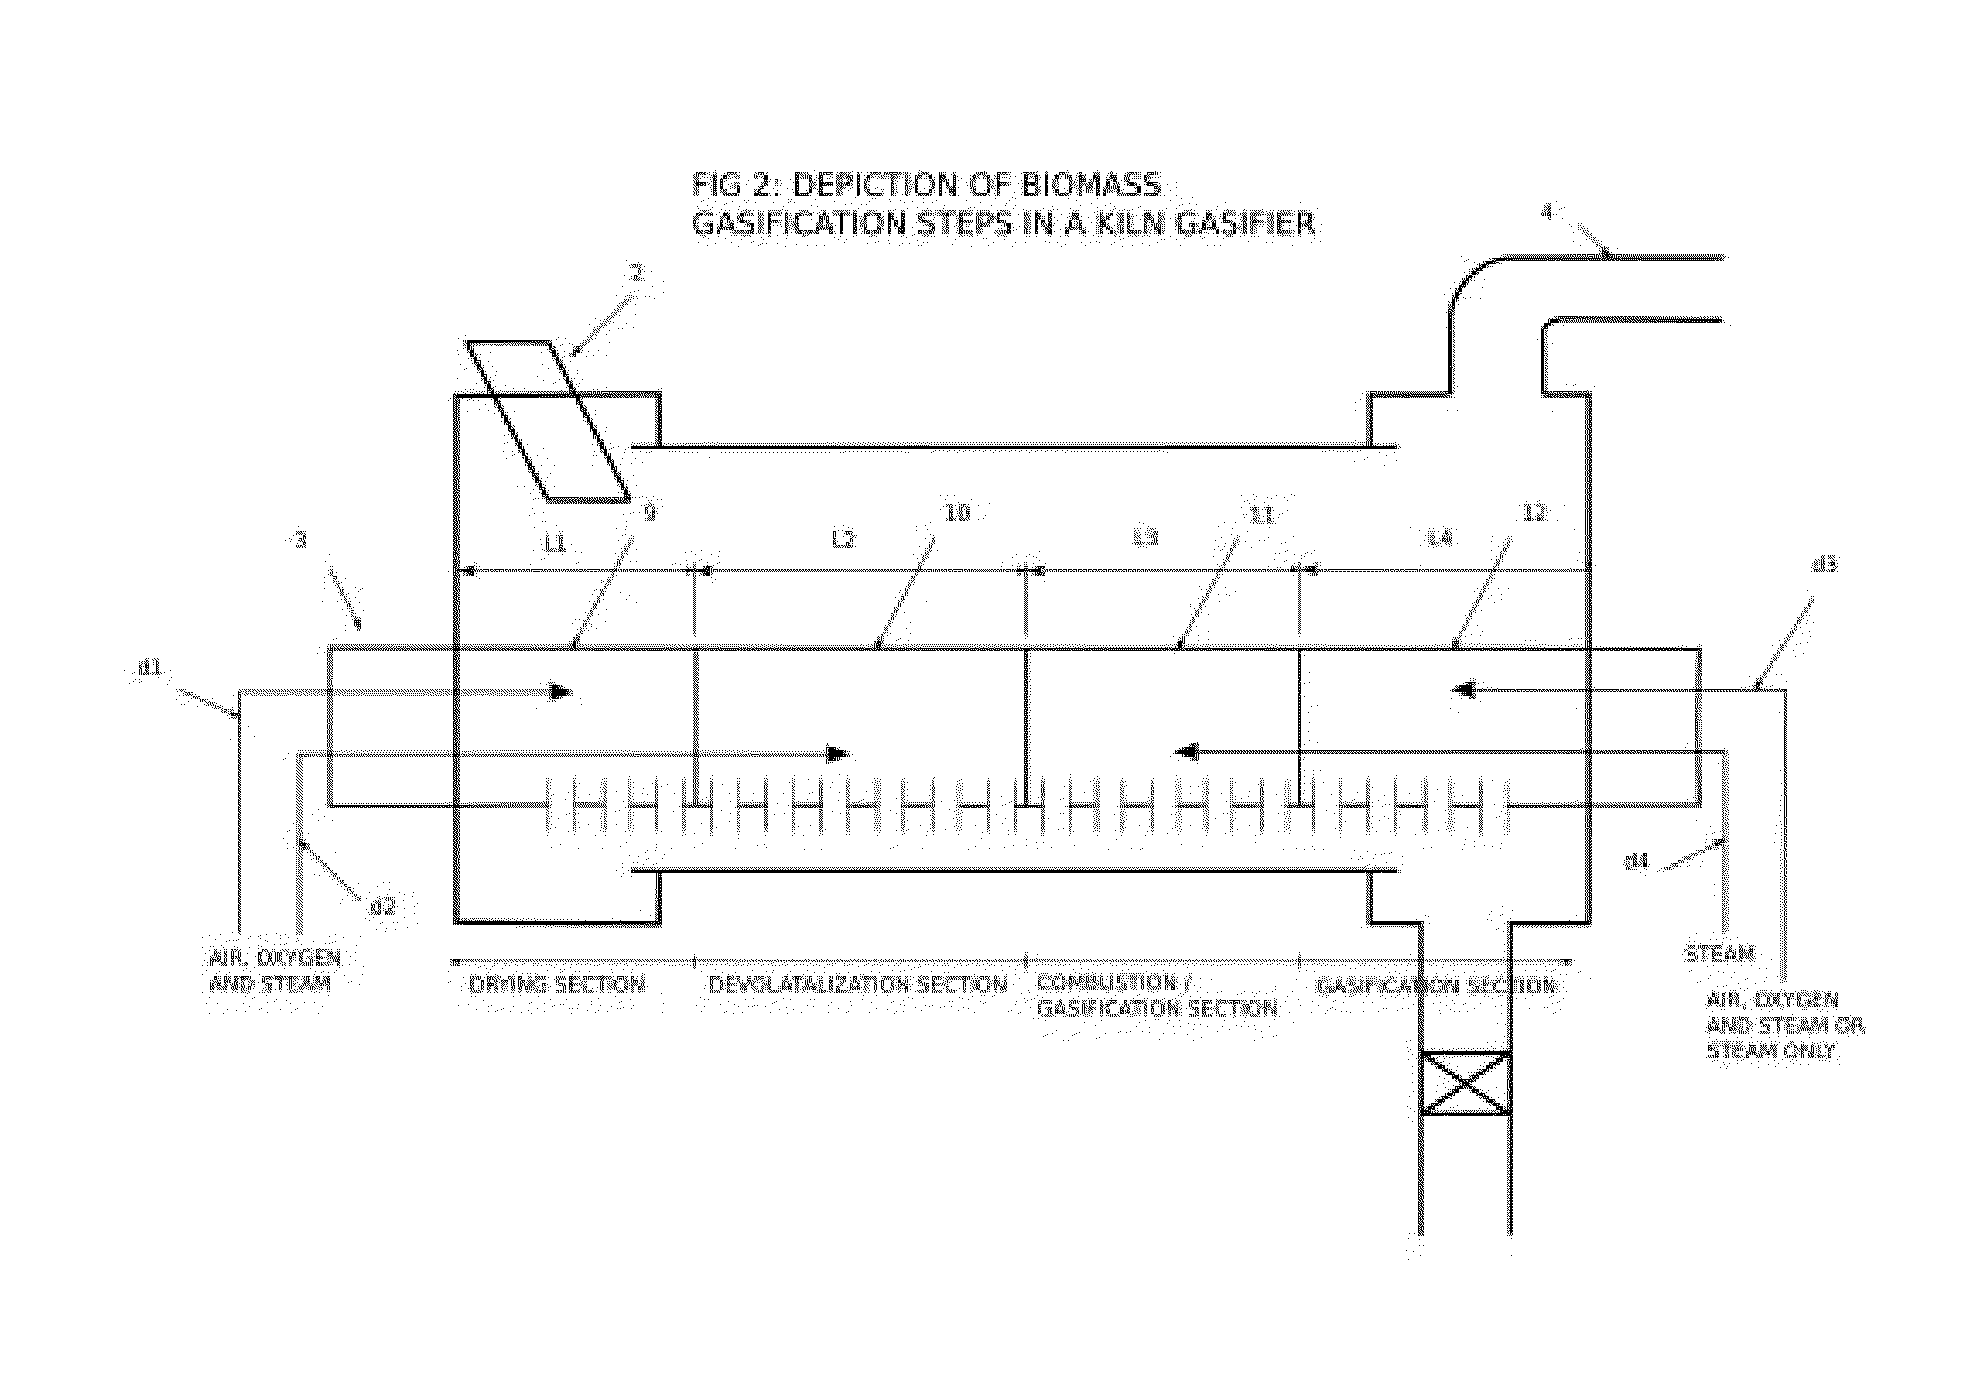 Gas distribution arrangement for rotary reactor